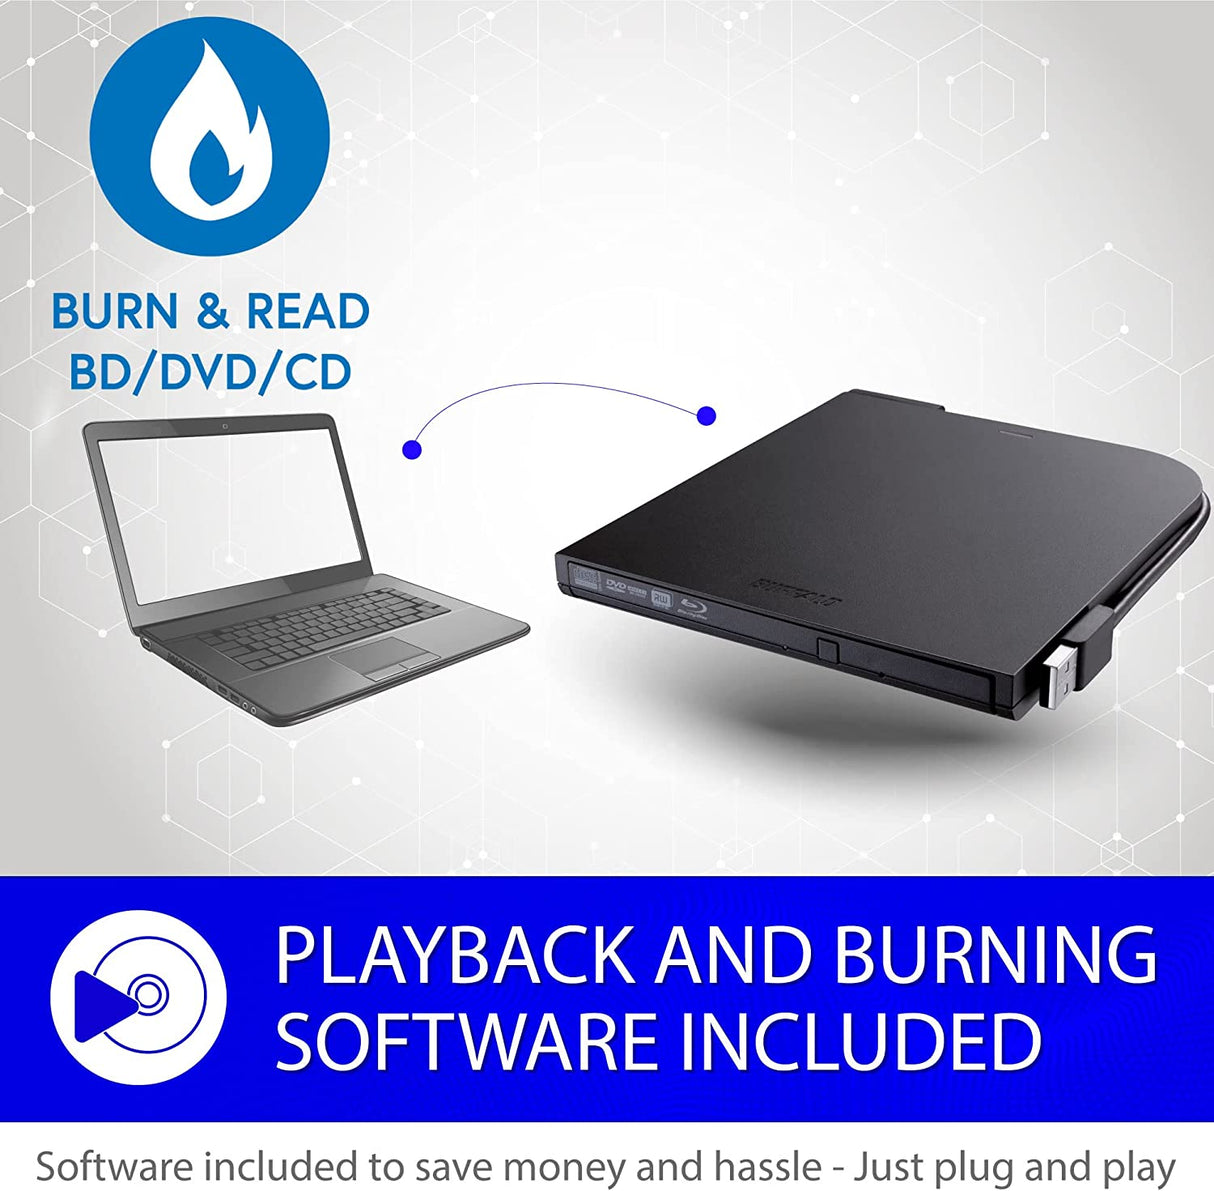 BUFFALO Portable Blu-ray Drive/External, Plays and Burns Blu-Rays, DVDs, and CDs with USB Connection. Compatible with Laptop, Desktop PC and Mac.